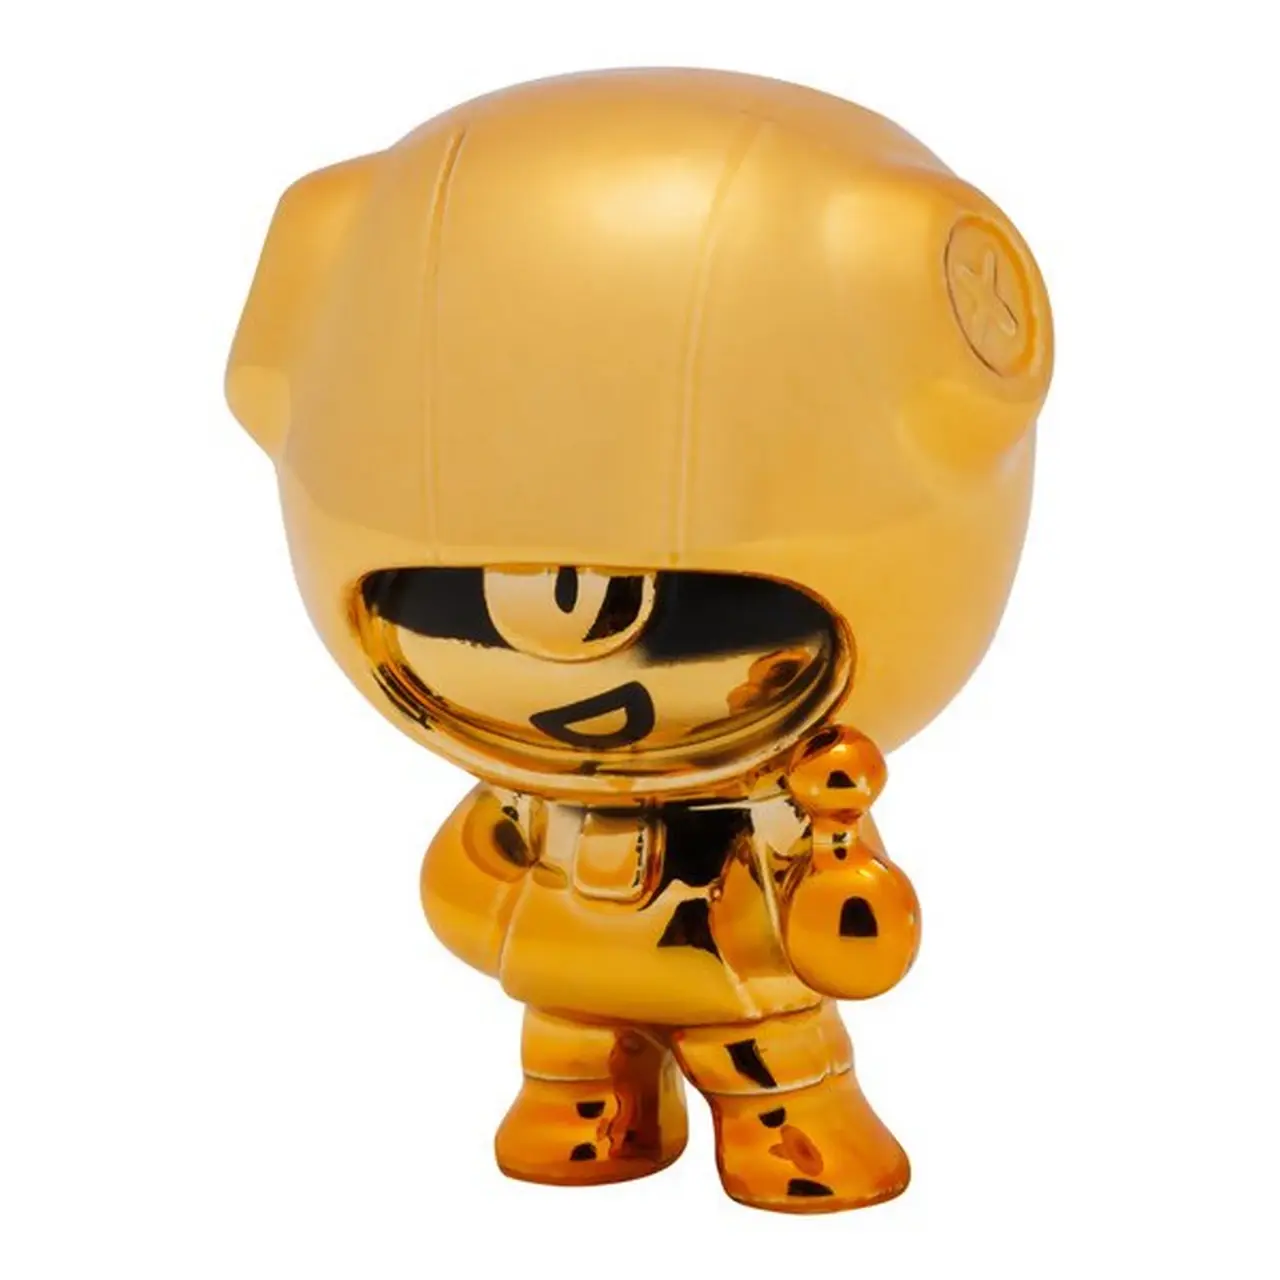 Selected image for BRAWL STARS Line Friends Figurica True Gold Leon